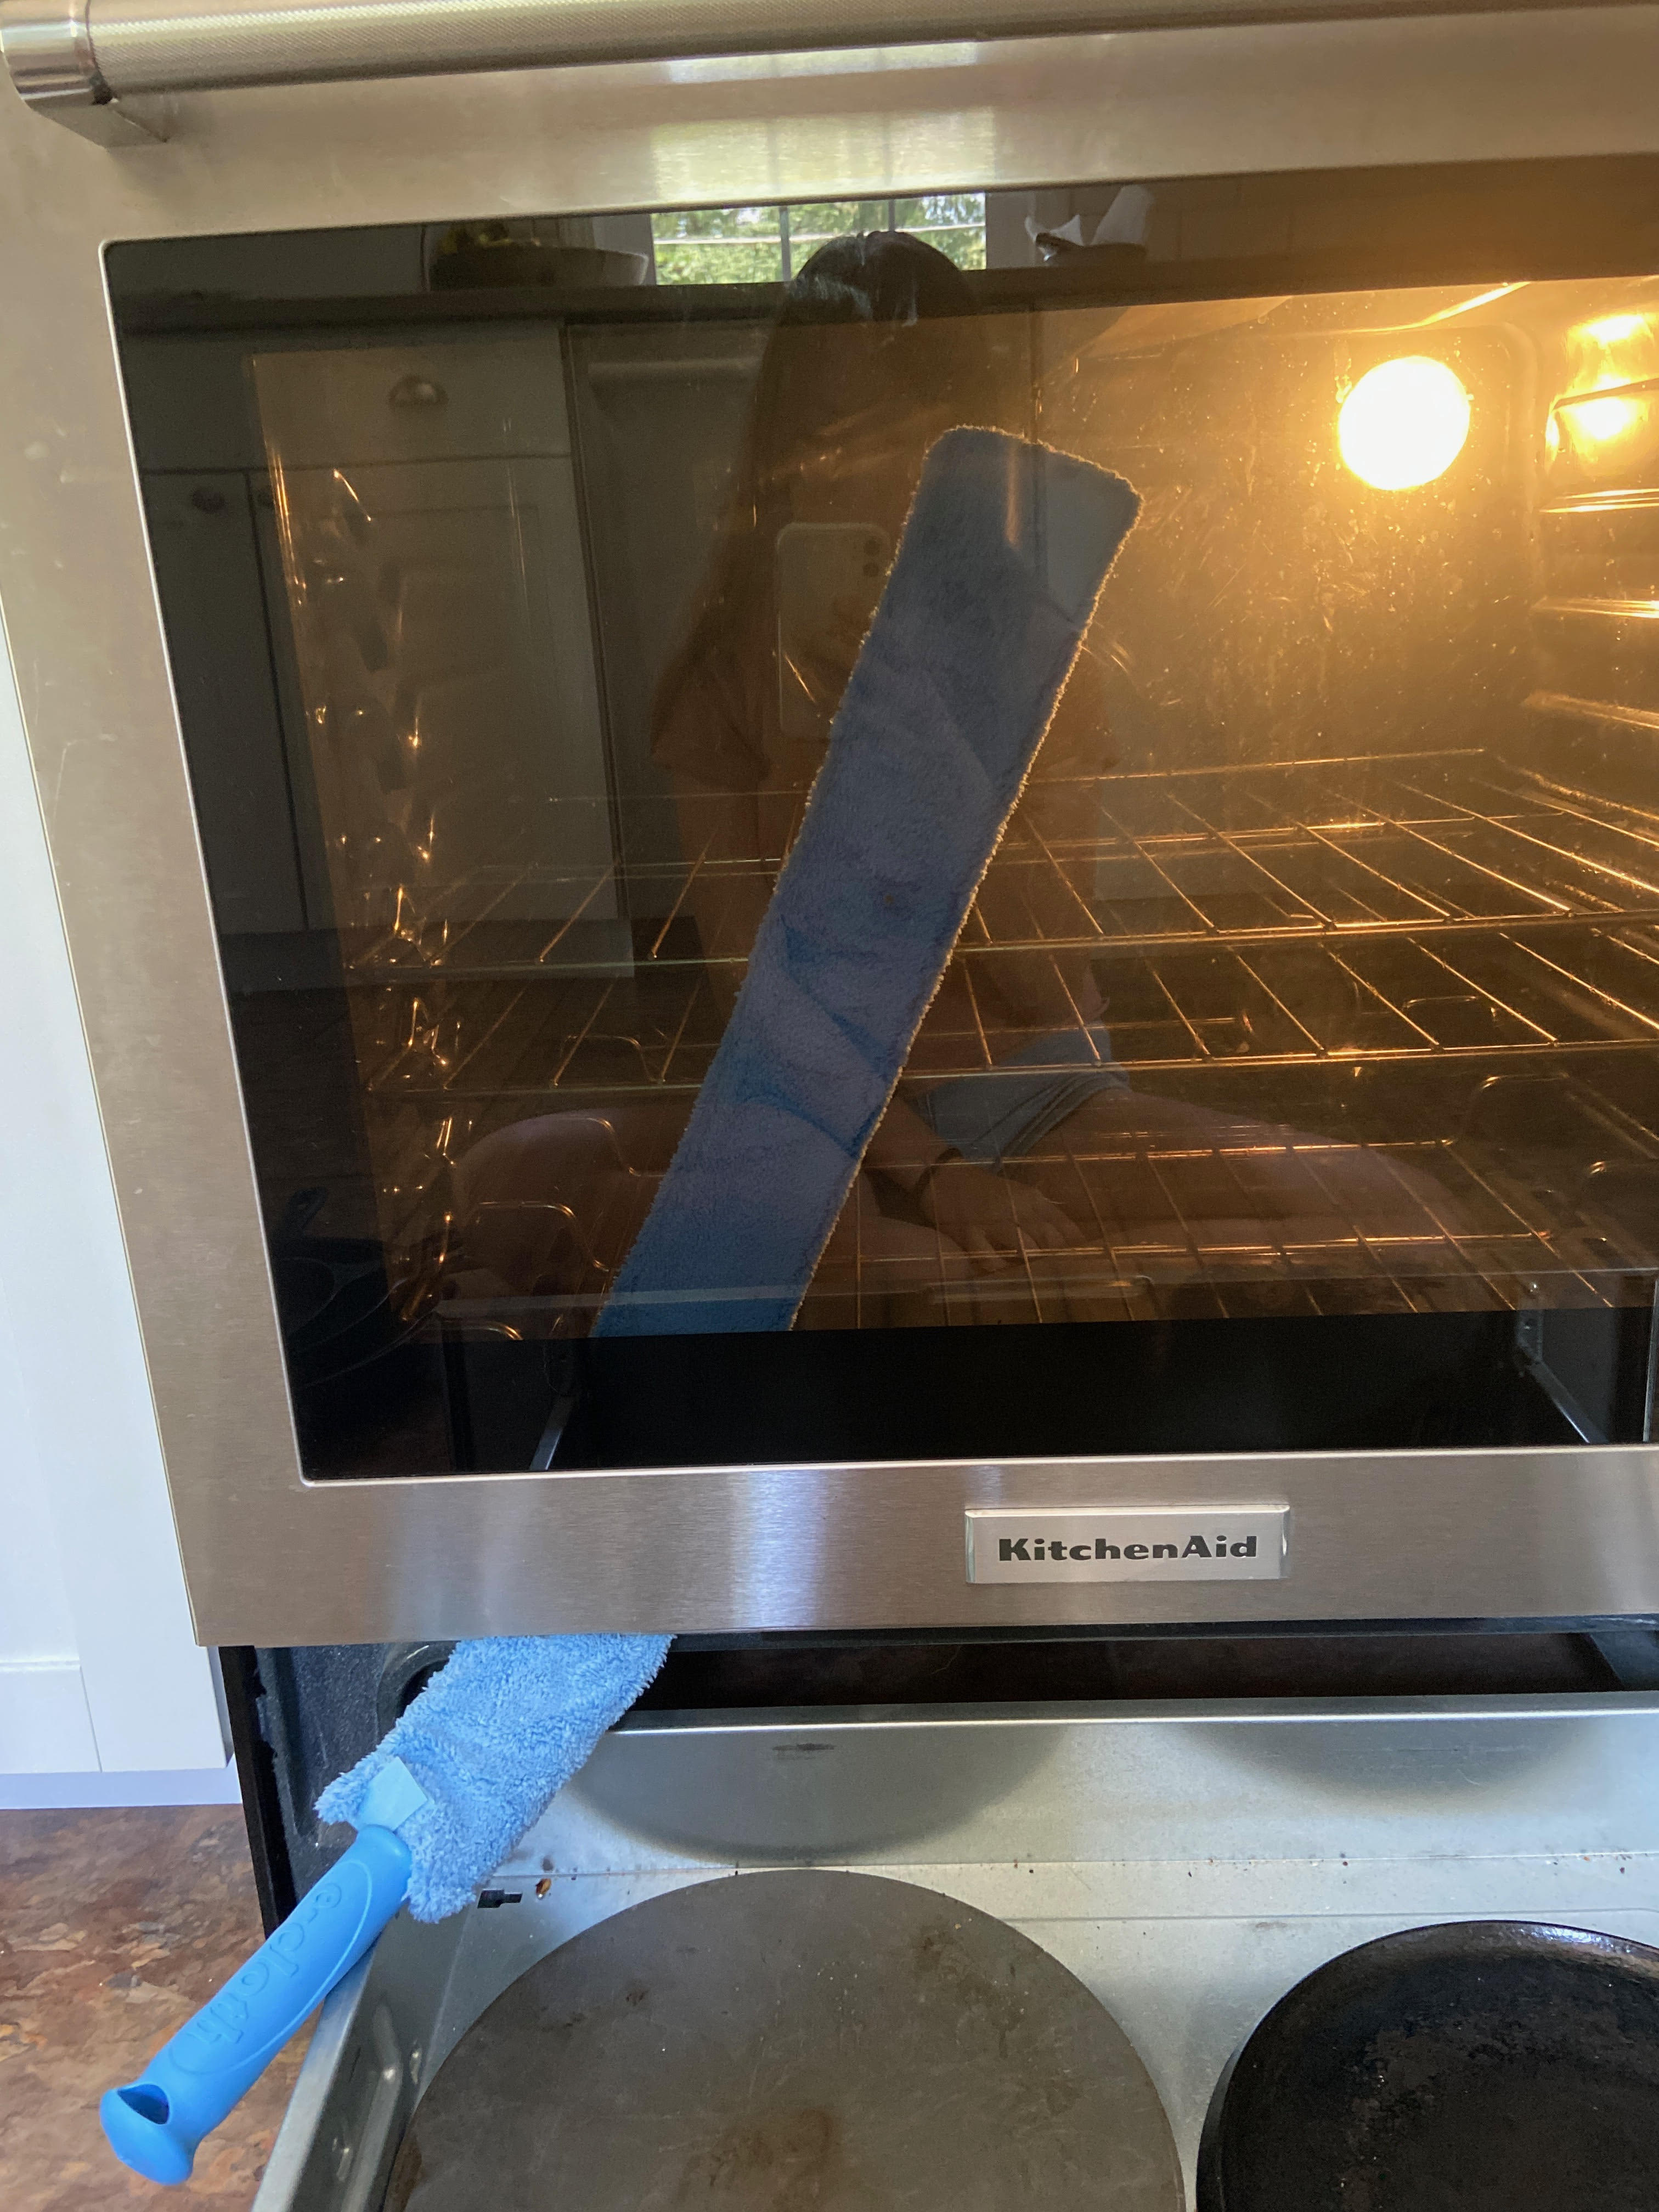 Learn how to clean oven door glass inside, out, and in-between